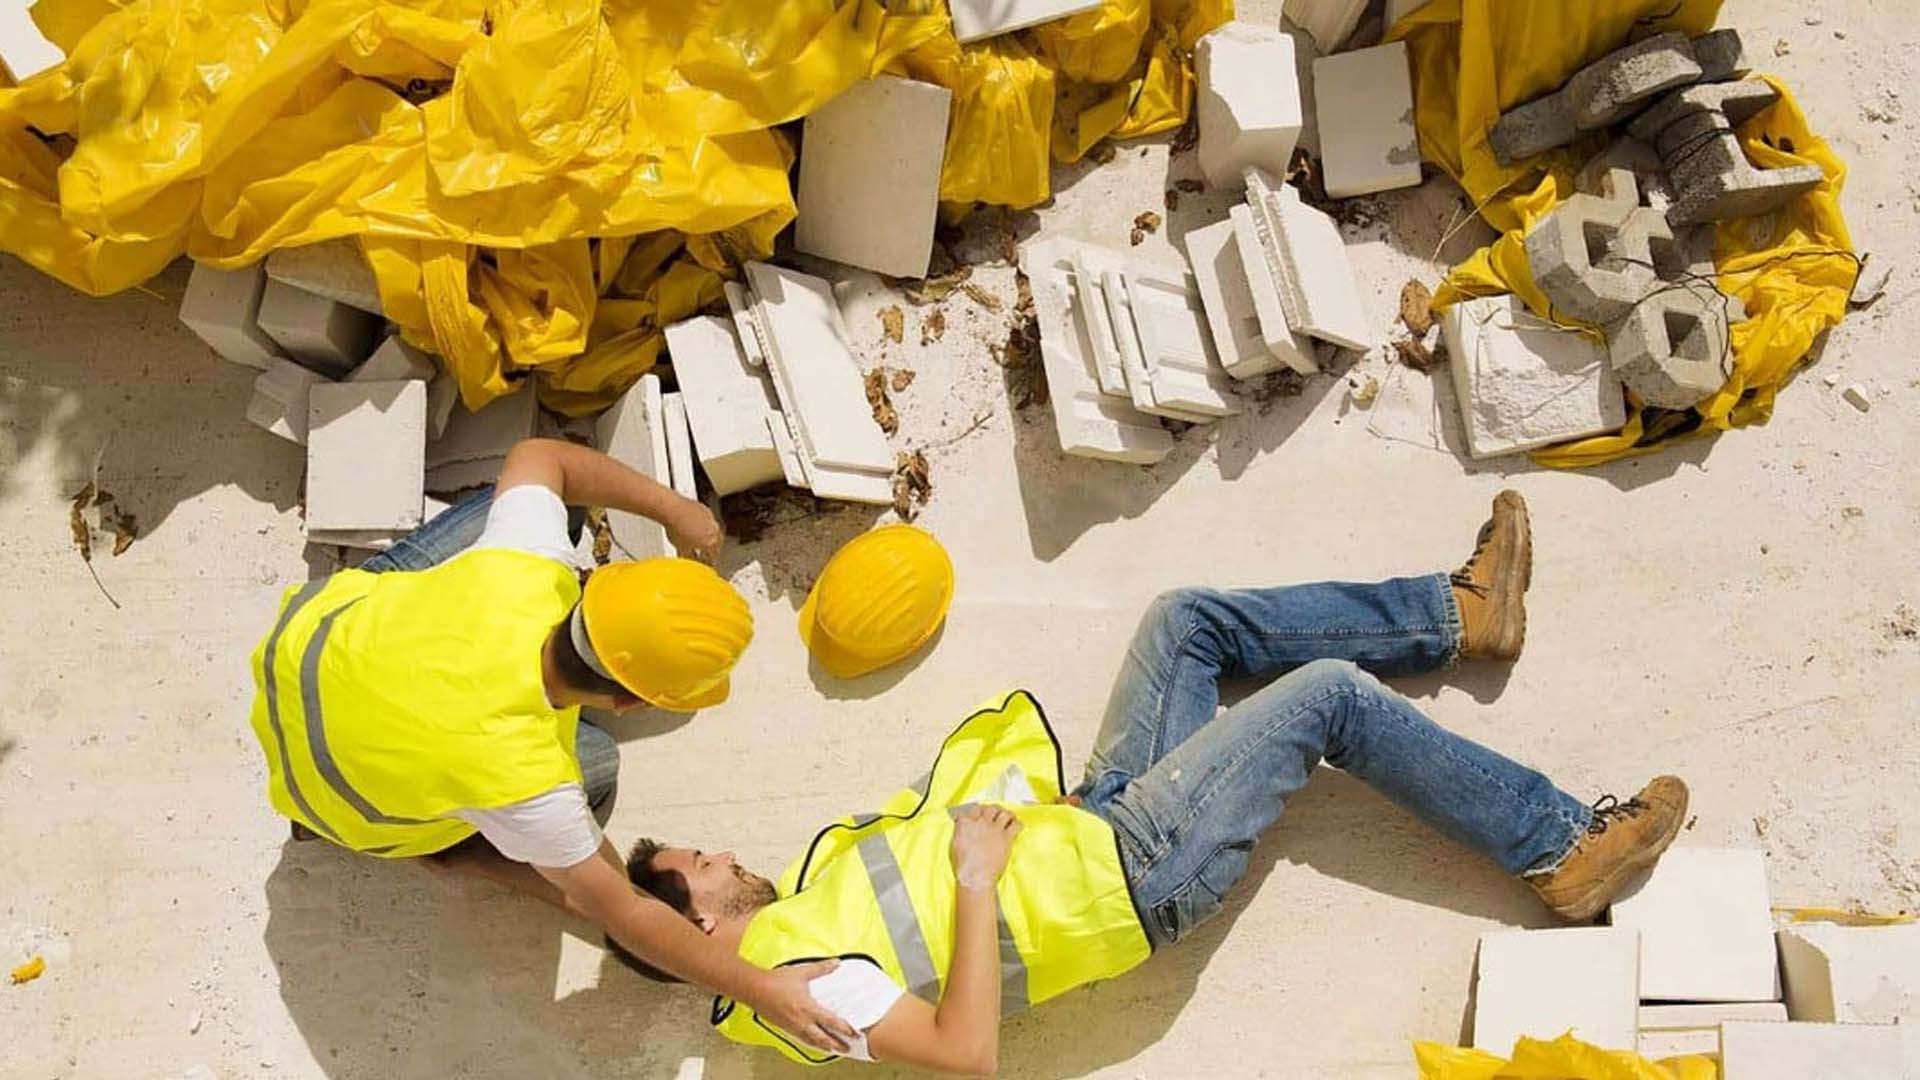 Workplace Injury: Distractions in the Workplace May Lead to Injuries, Lost Time, and Lost Productivity